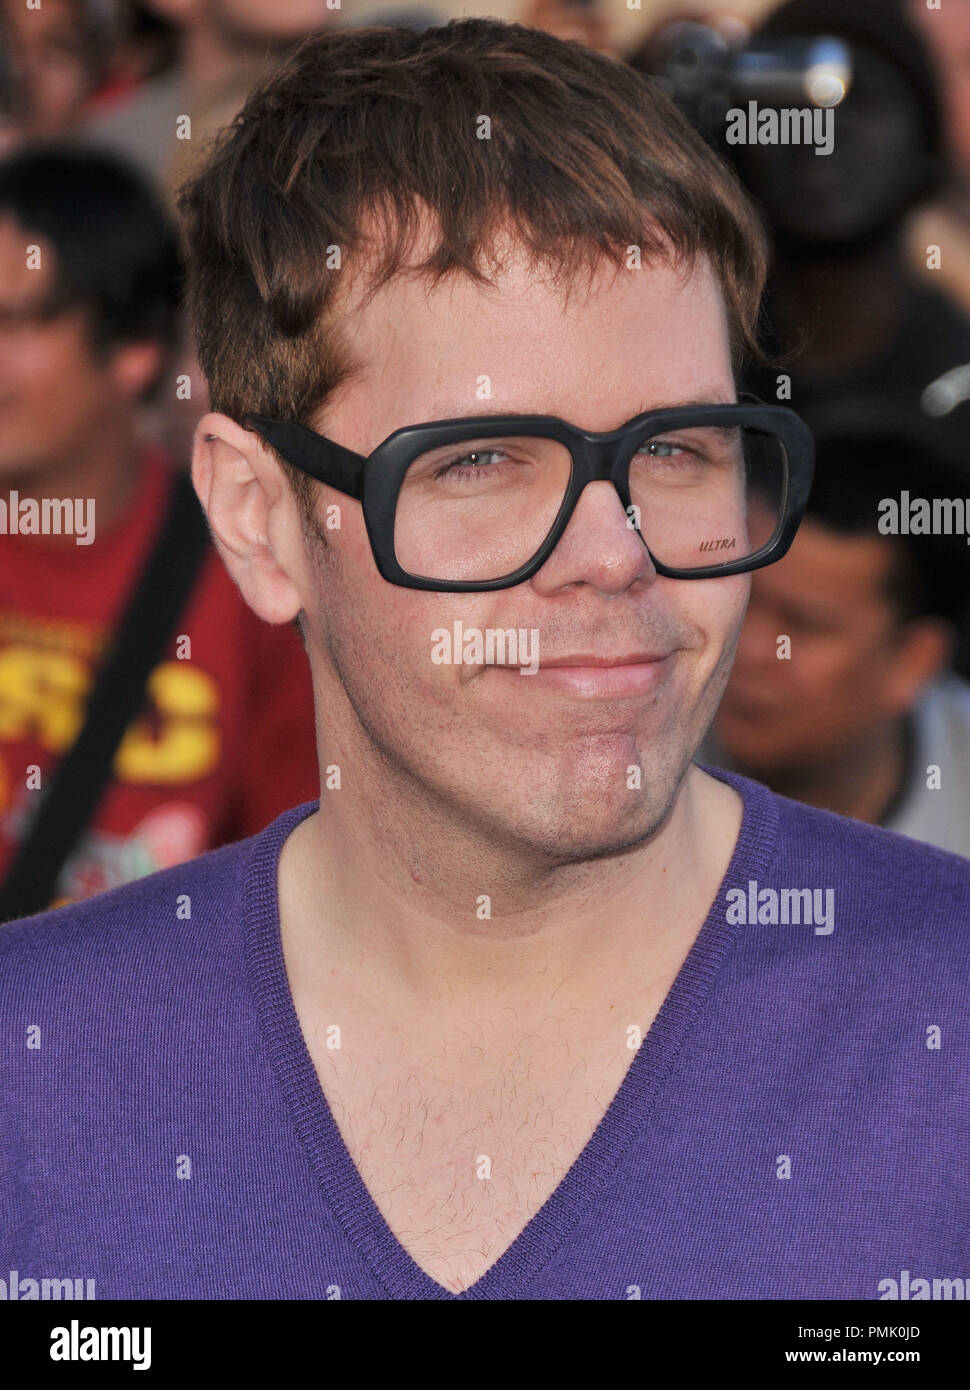 Perez Hilton at the World Premiere of 'Gnomeo & Juliet' held at the El Capitan Theatre in Hollywood, CA. The event took place on Sunday, January 23, 2011. Photo by PRPP Pacific Rim Photo Press/ PictureLux Stock Photo